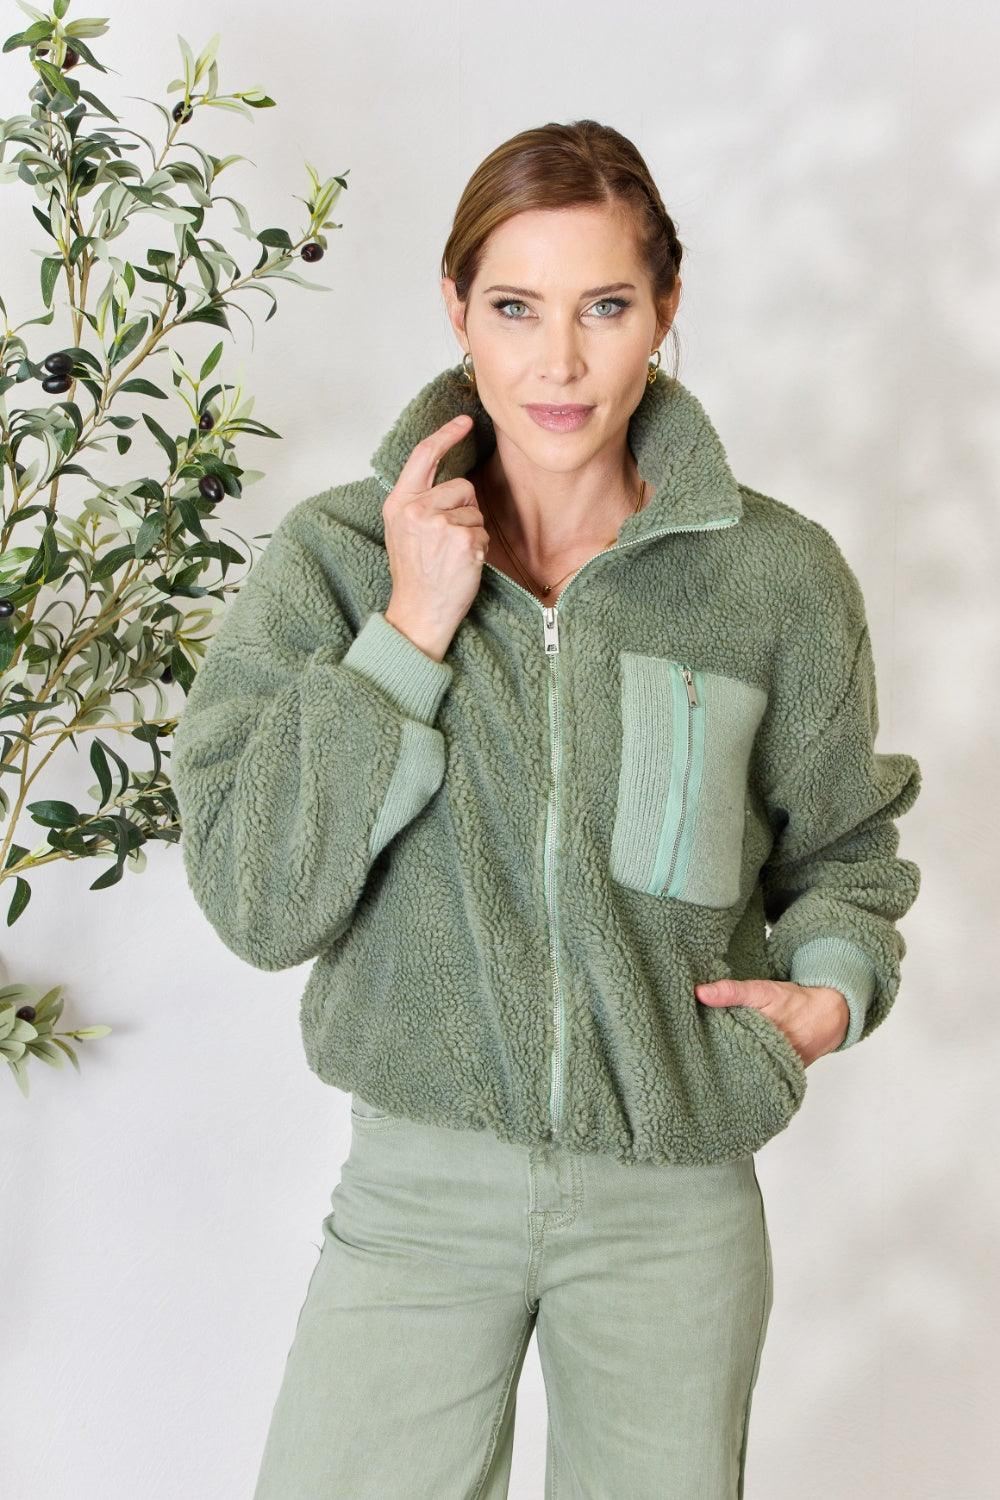 Green Zip Up Jacket - Inspired Eye Boutique